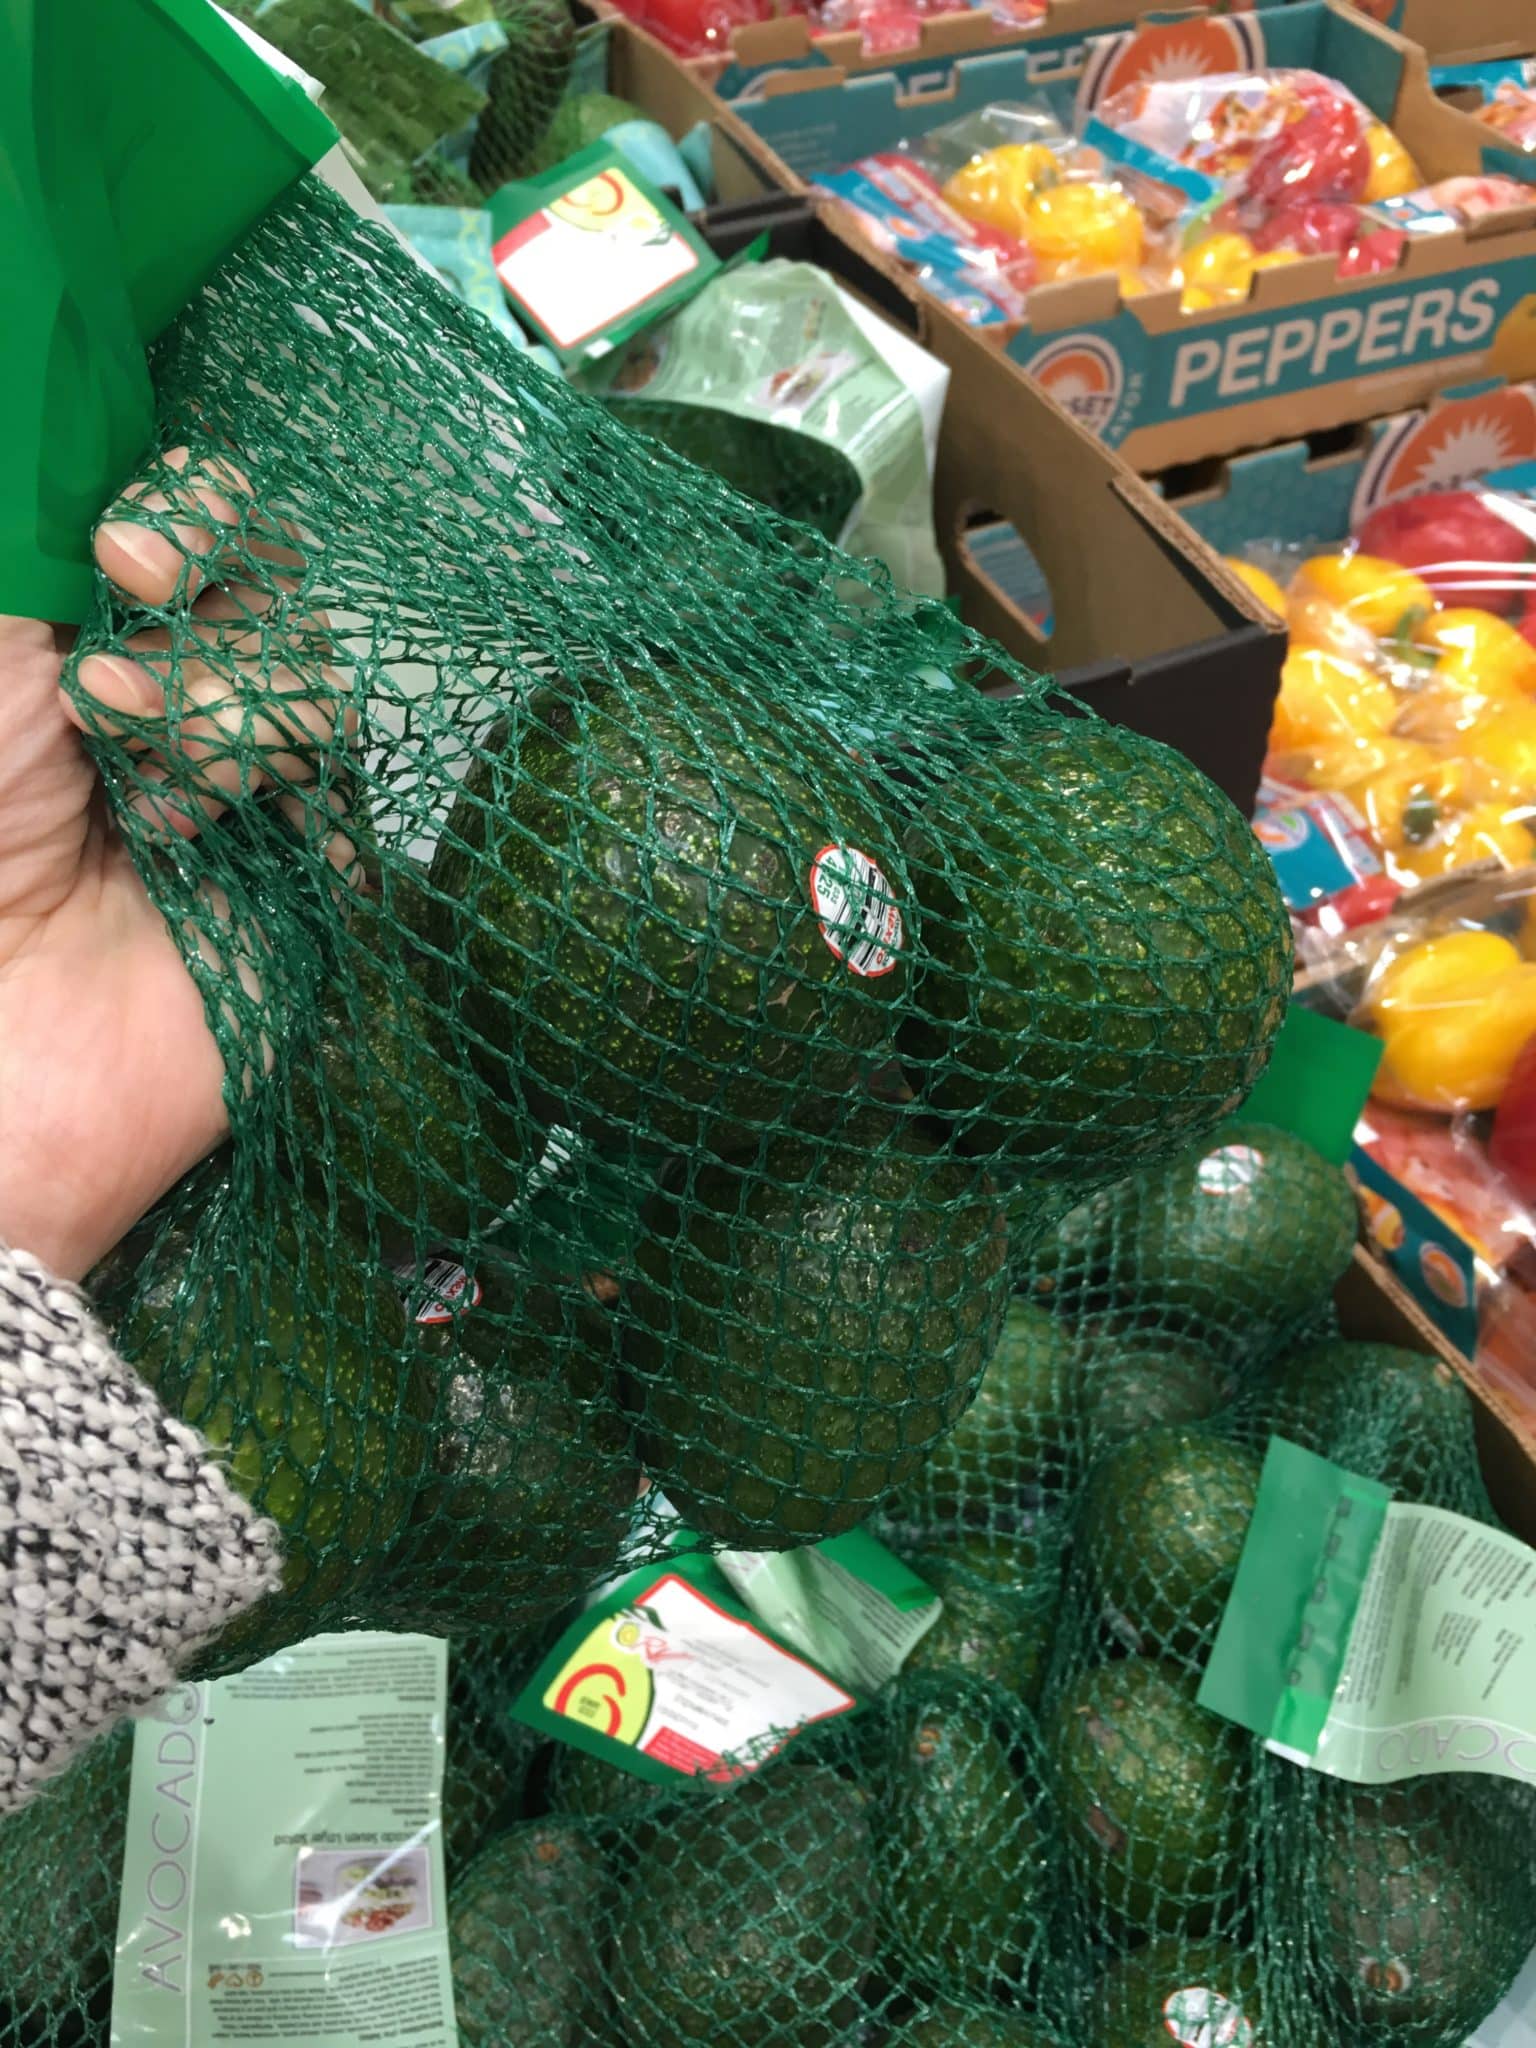 Avocados from Costco